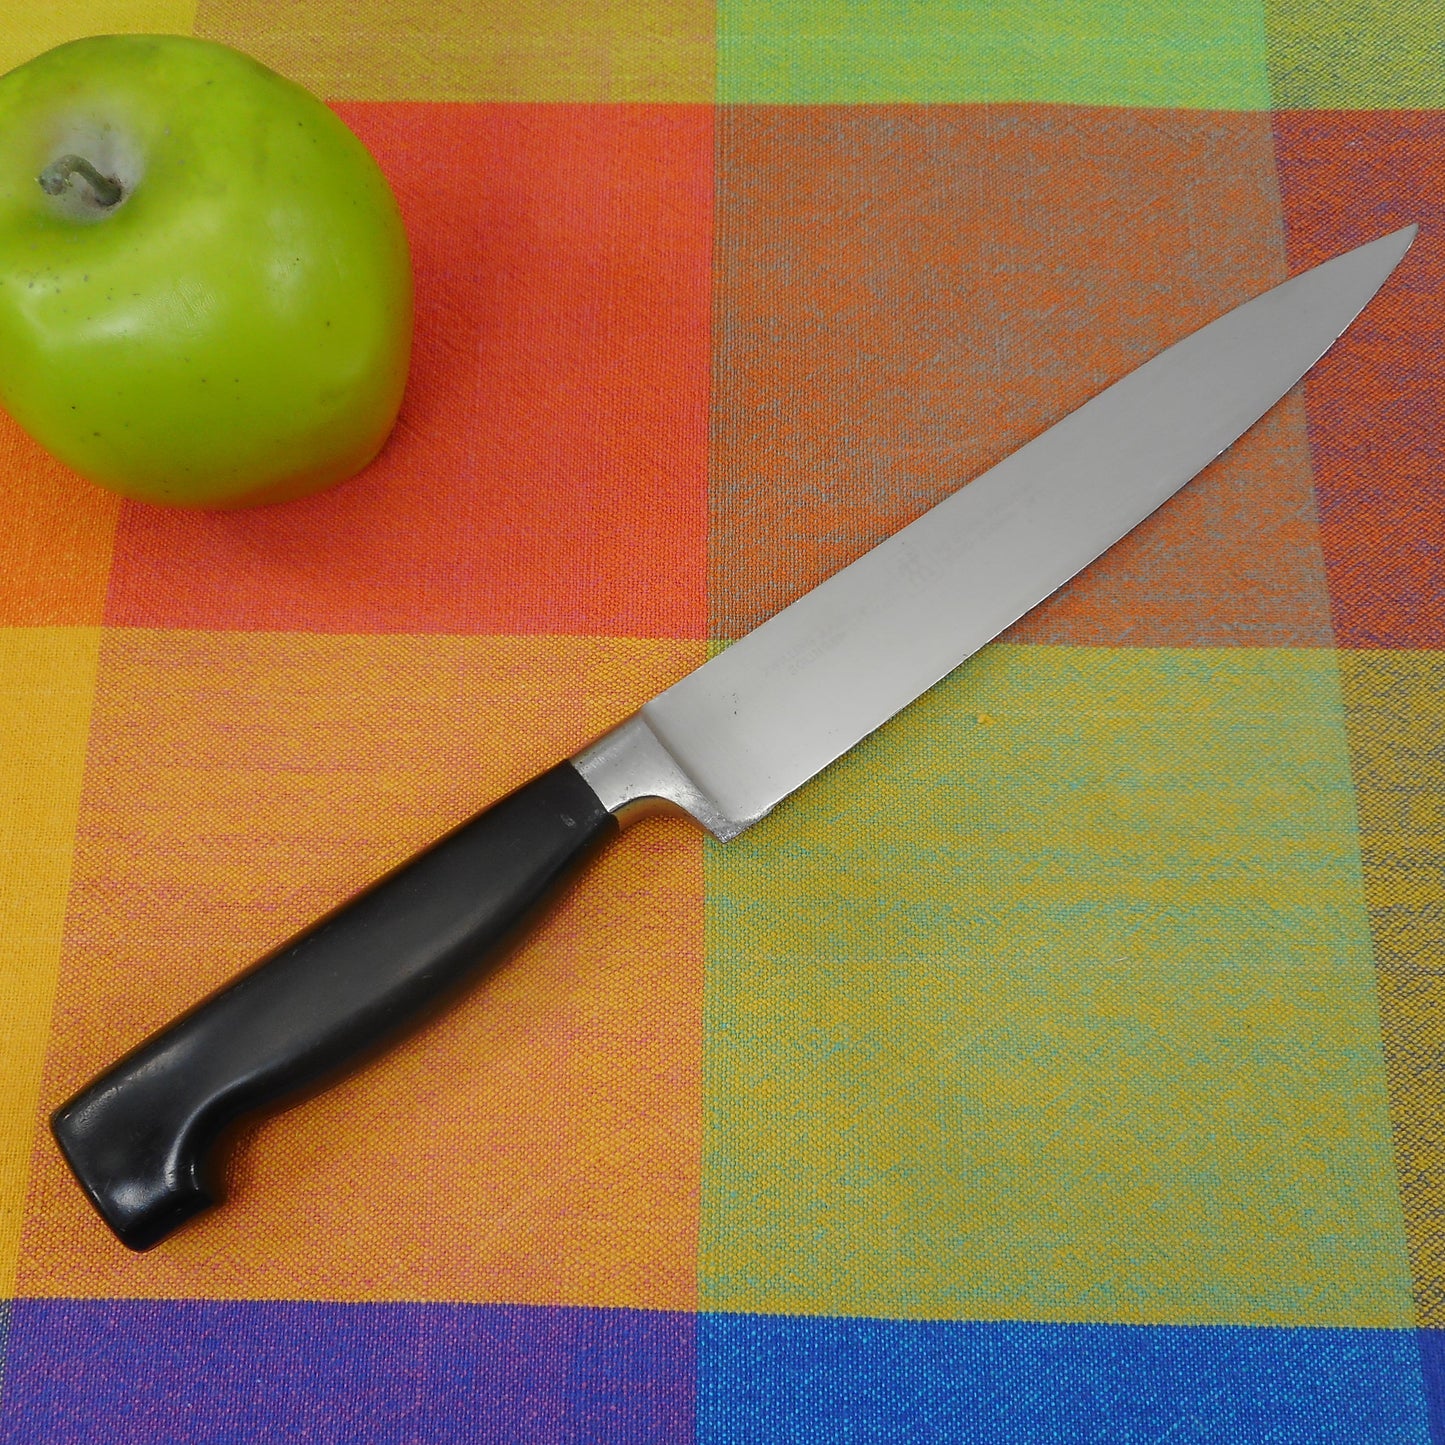 J.A. Henckels Germany 31070-200 mm 8" Stainless Carving Knife